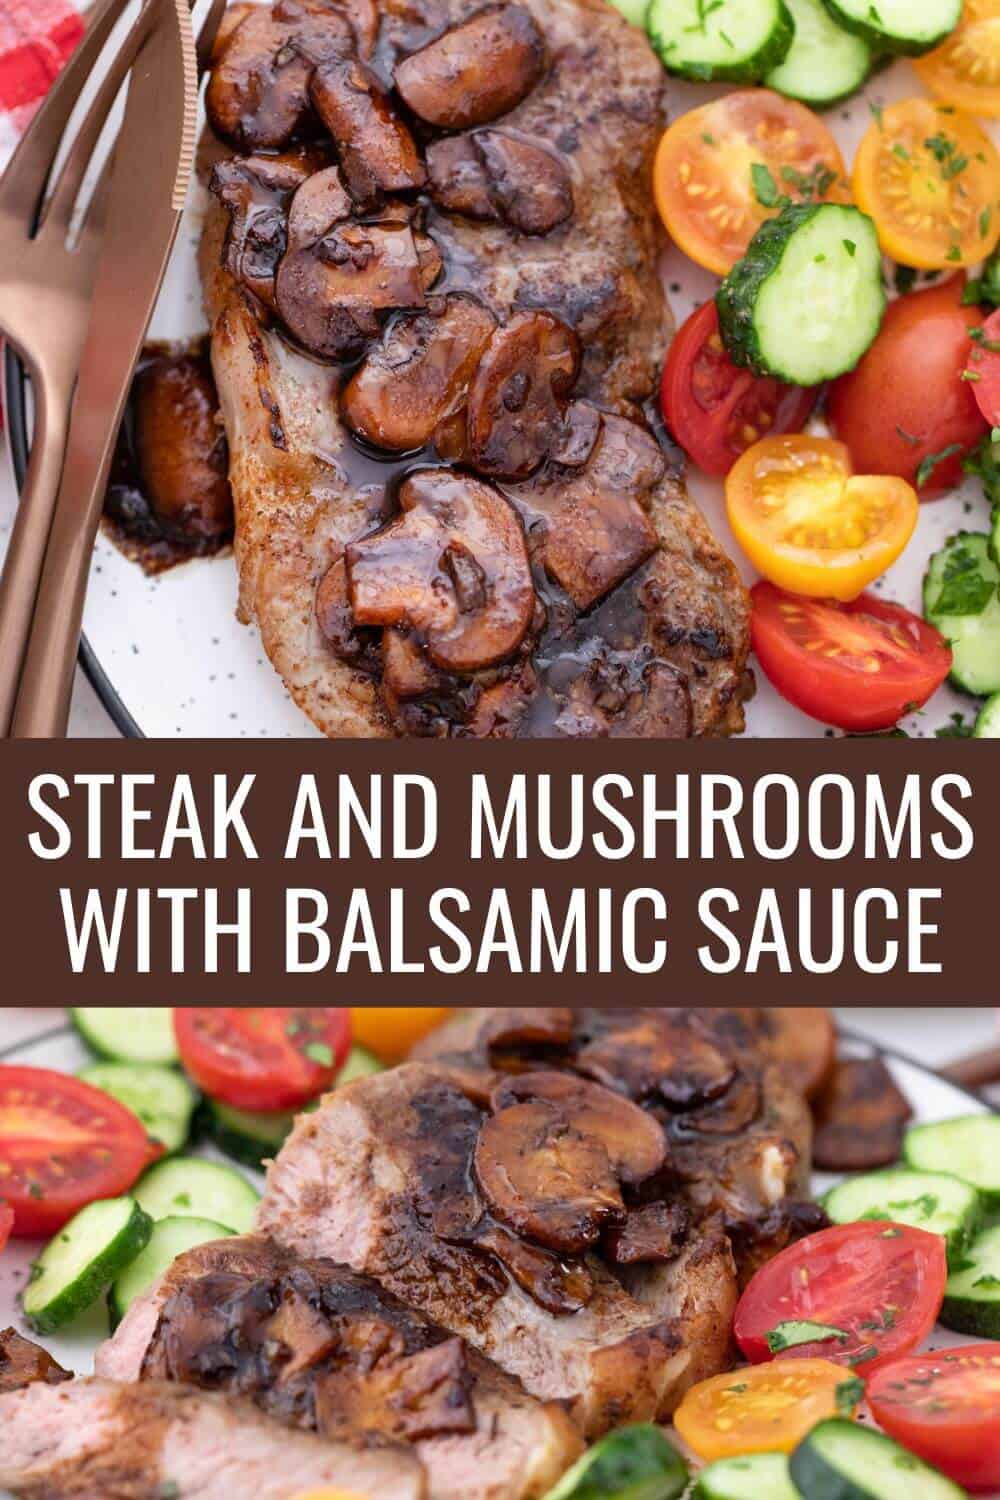 Steak and mushrooms with balsamic sauce.